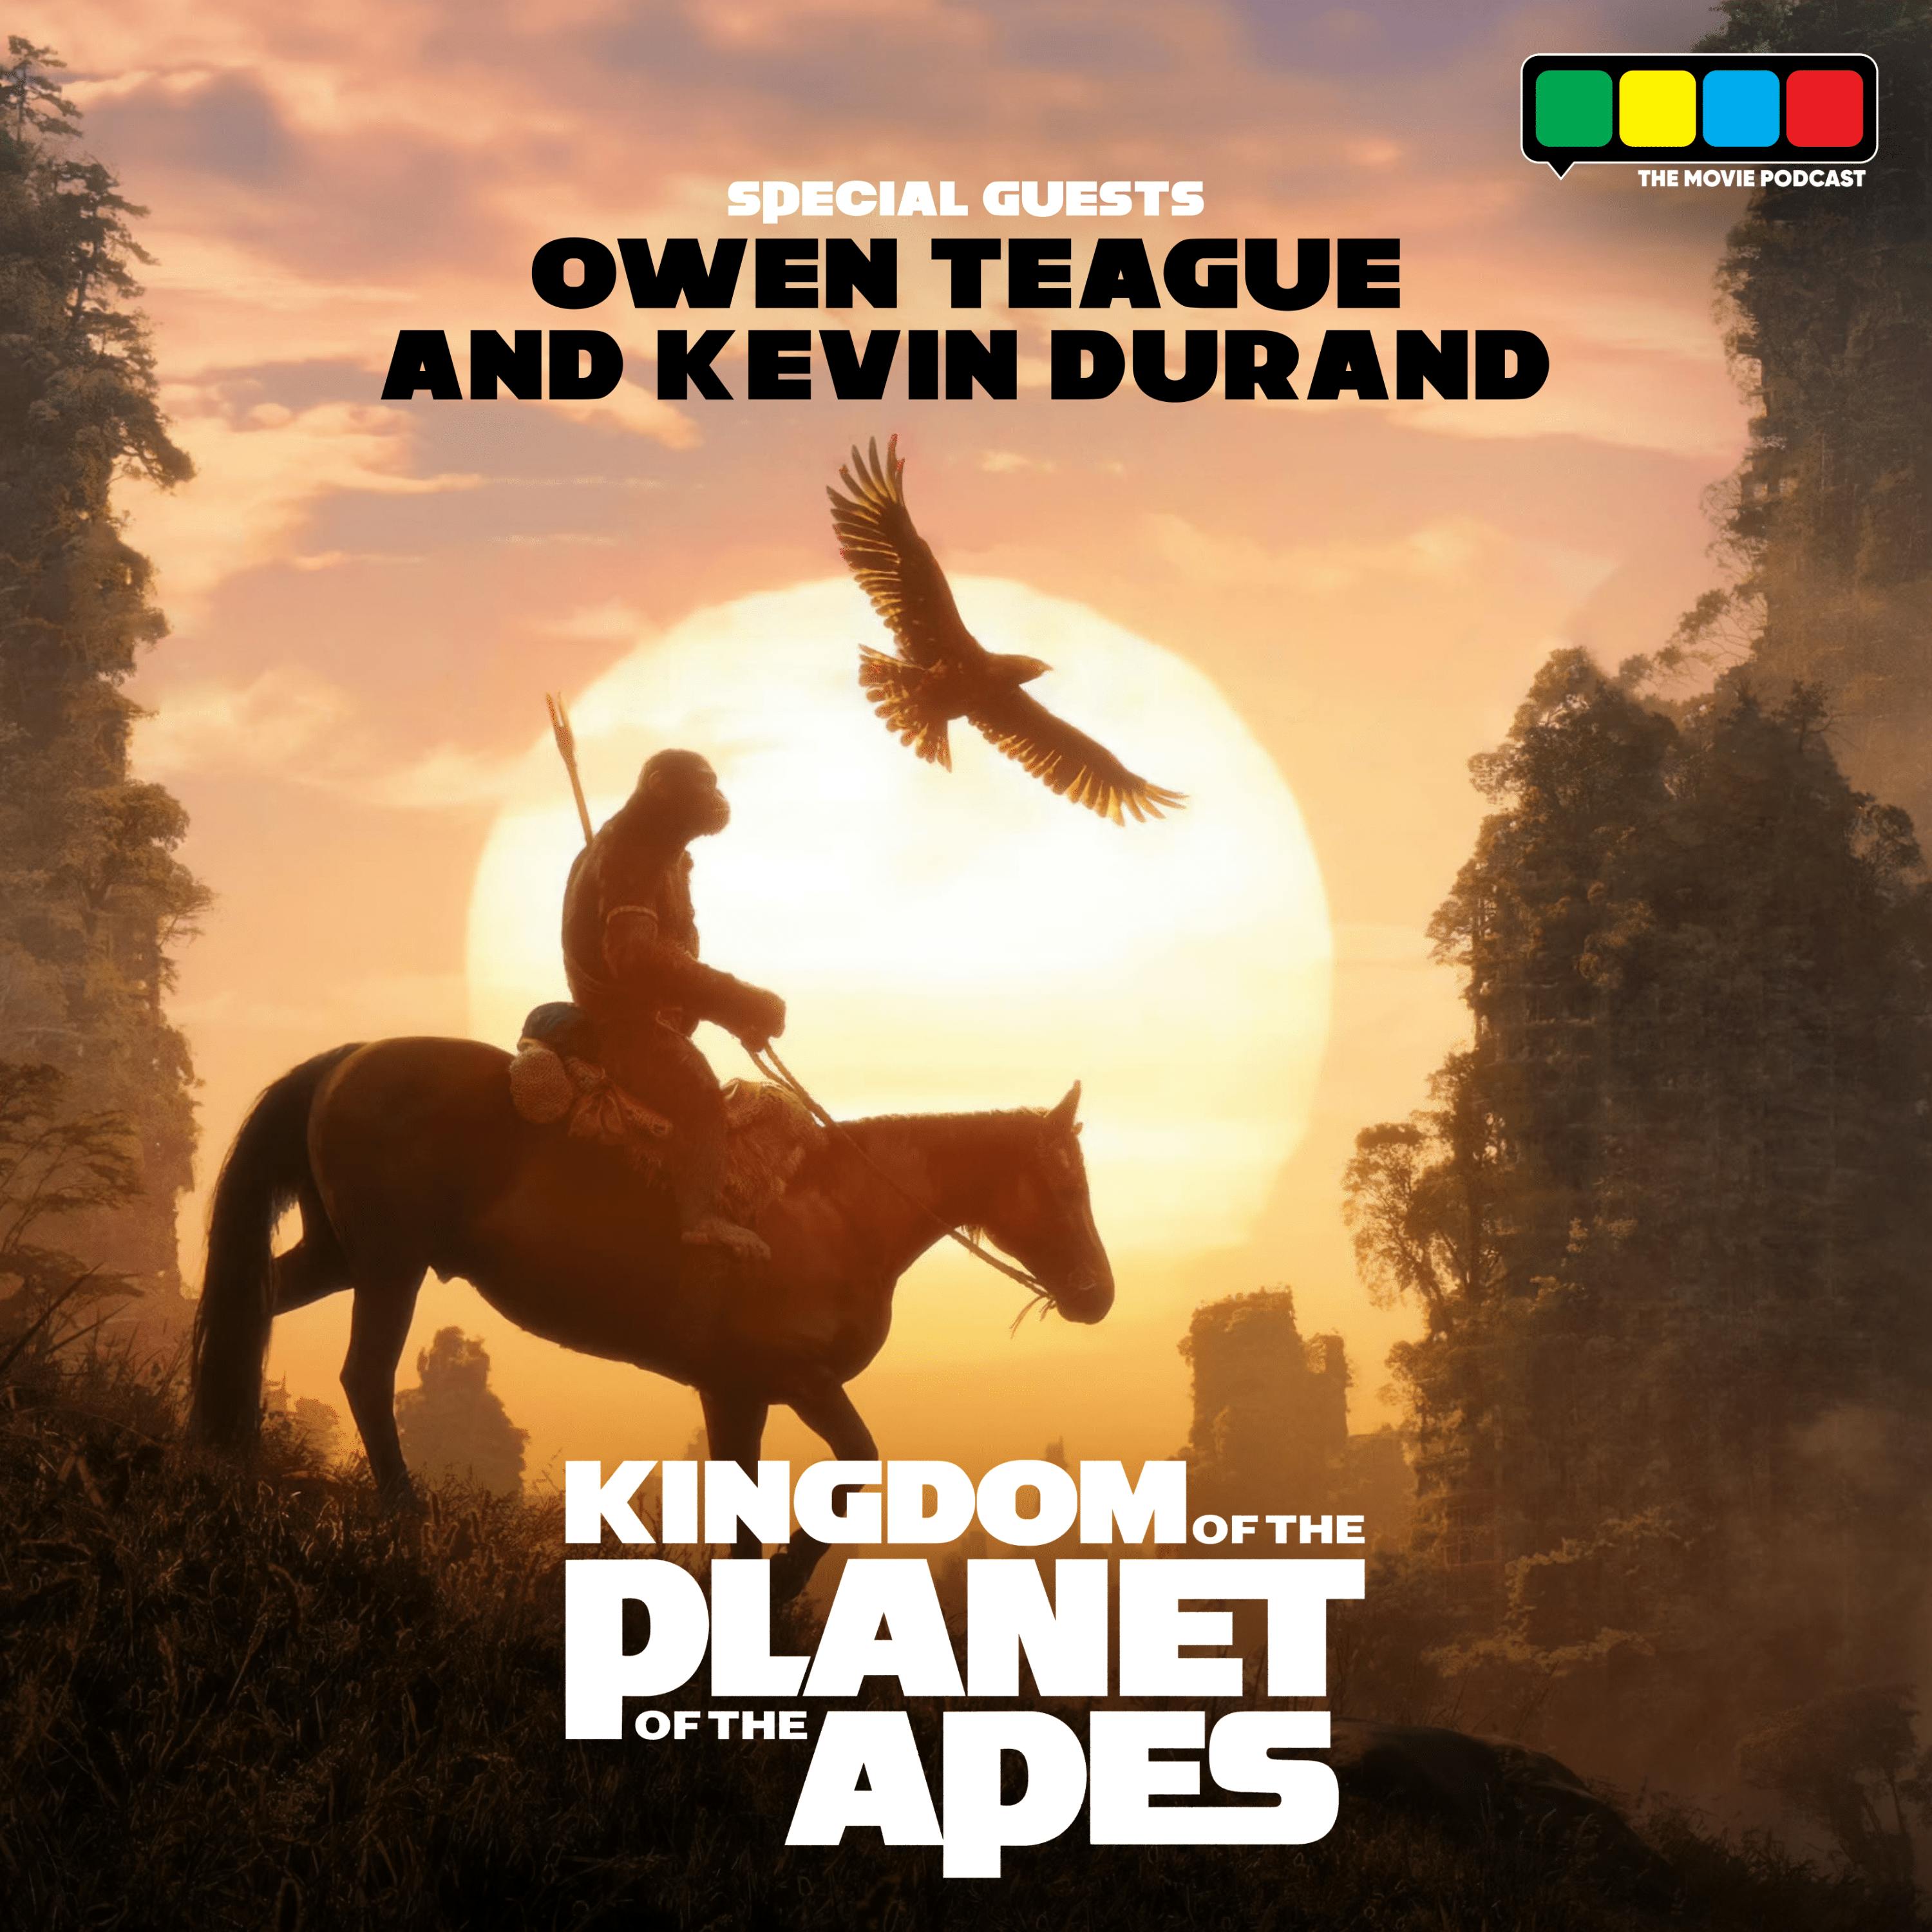 Kingdom of the Planet of the Apes Interview with Owen Teague and Kevin Durand